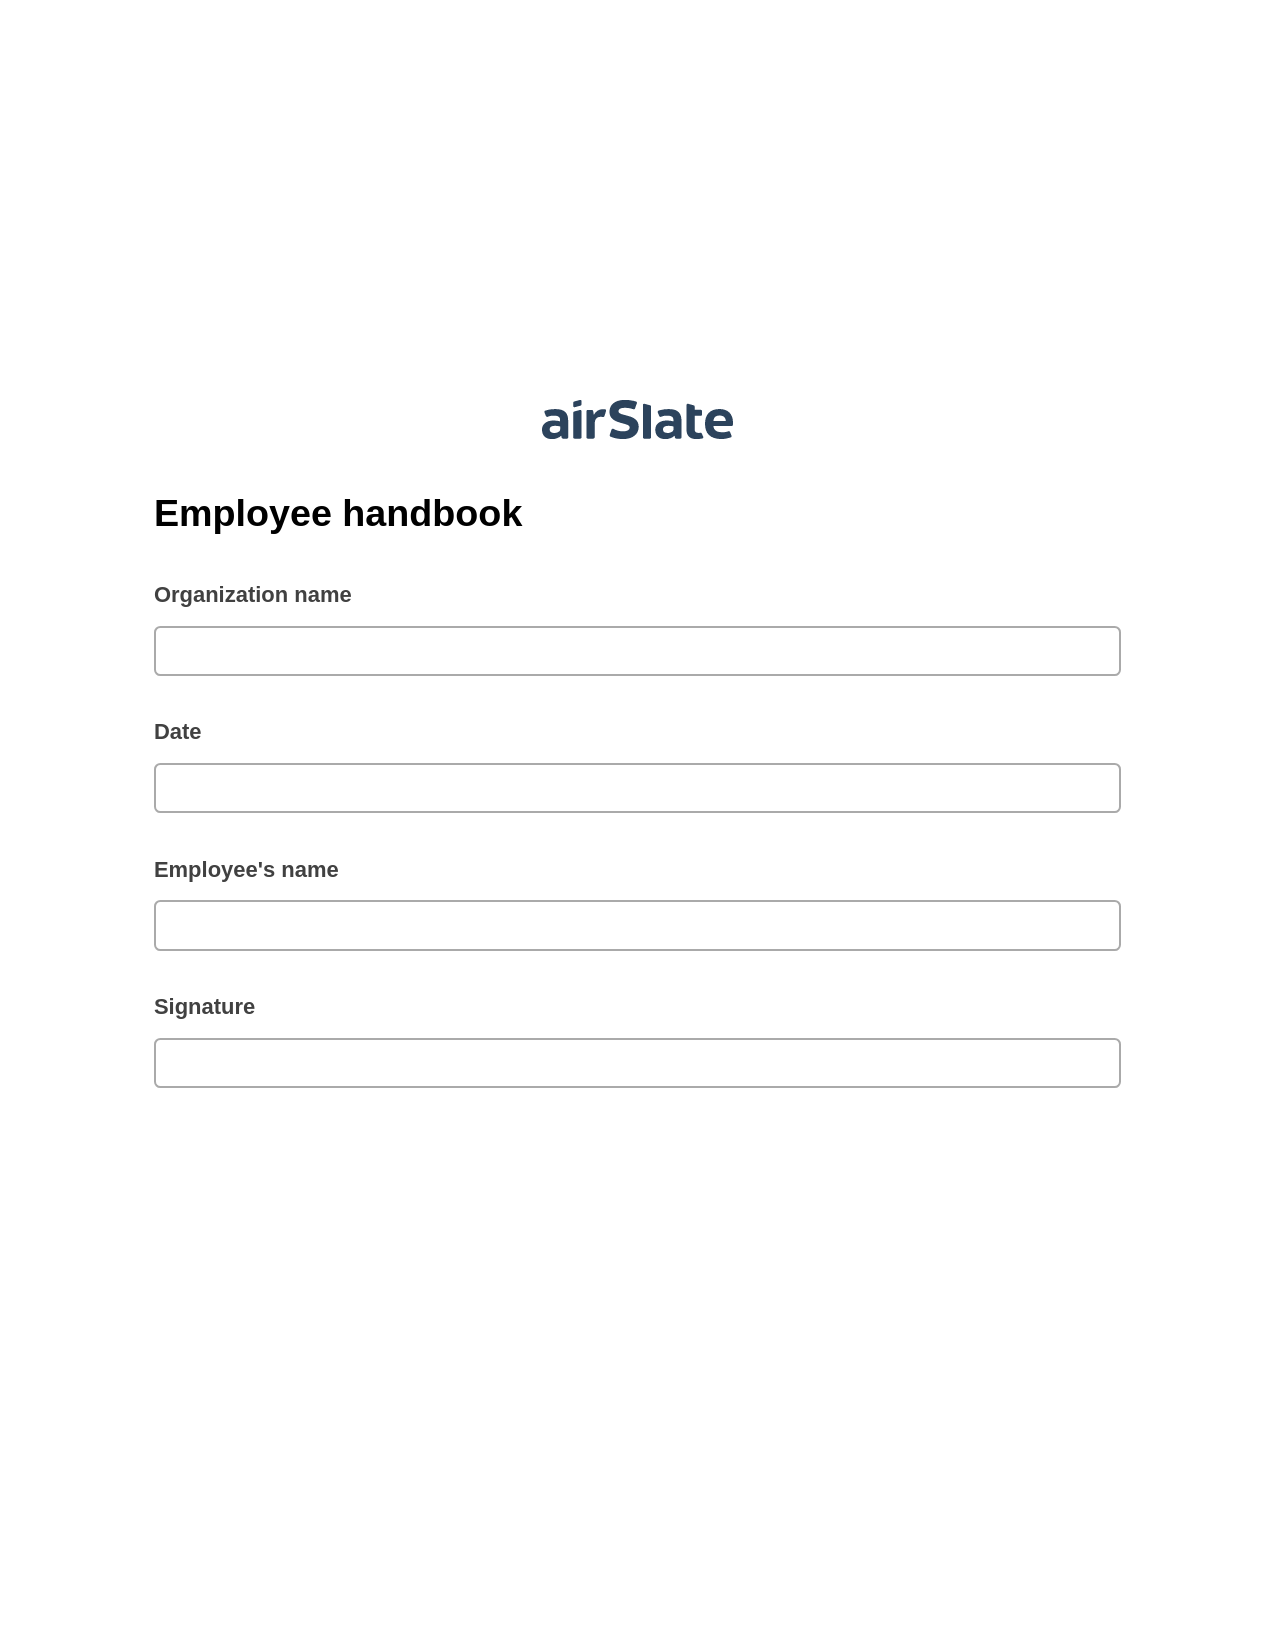 Multirole Employee handbook Pre-fill from another Slate Bot, Webhook Bot, Export to Formstack Documents Bot